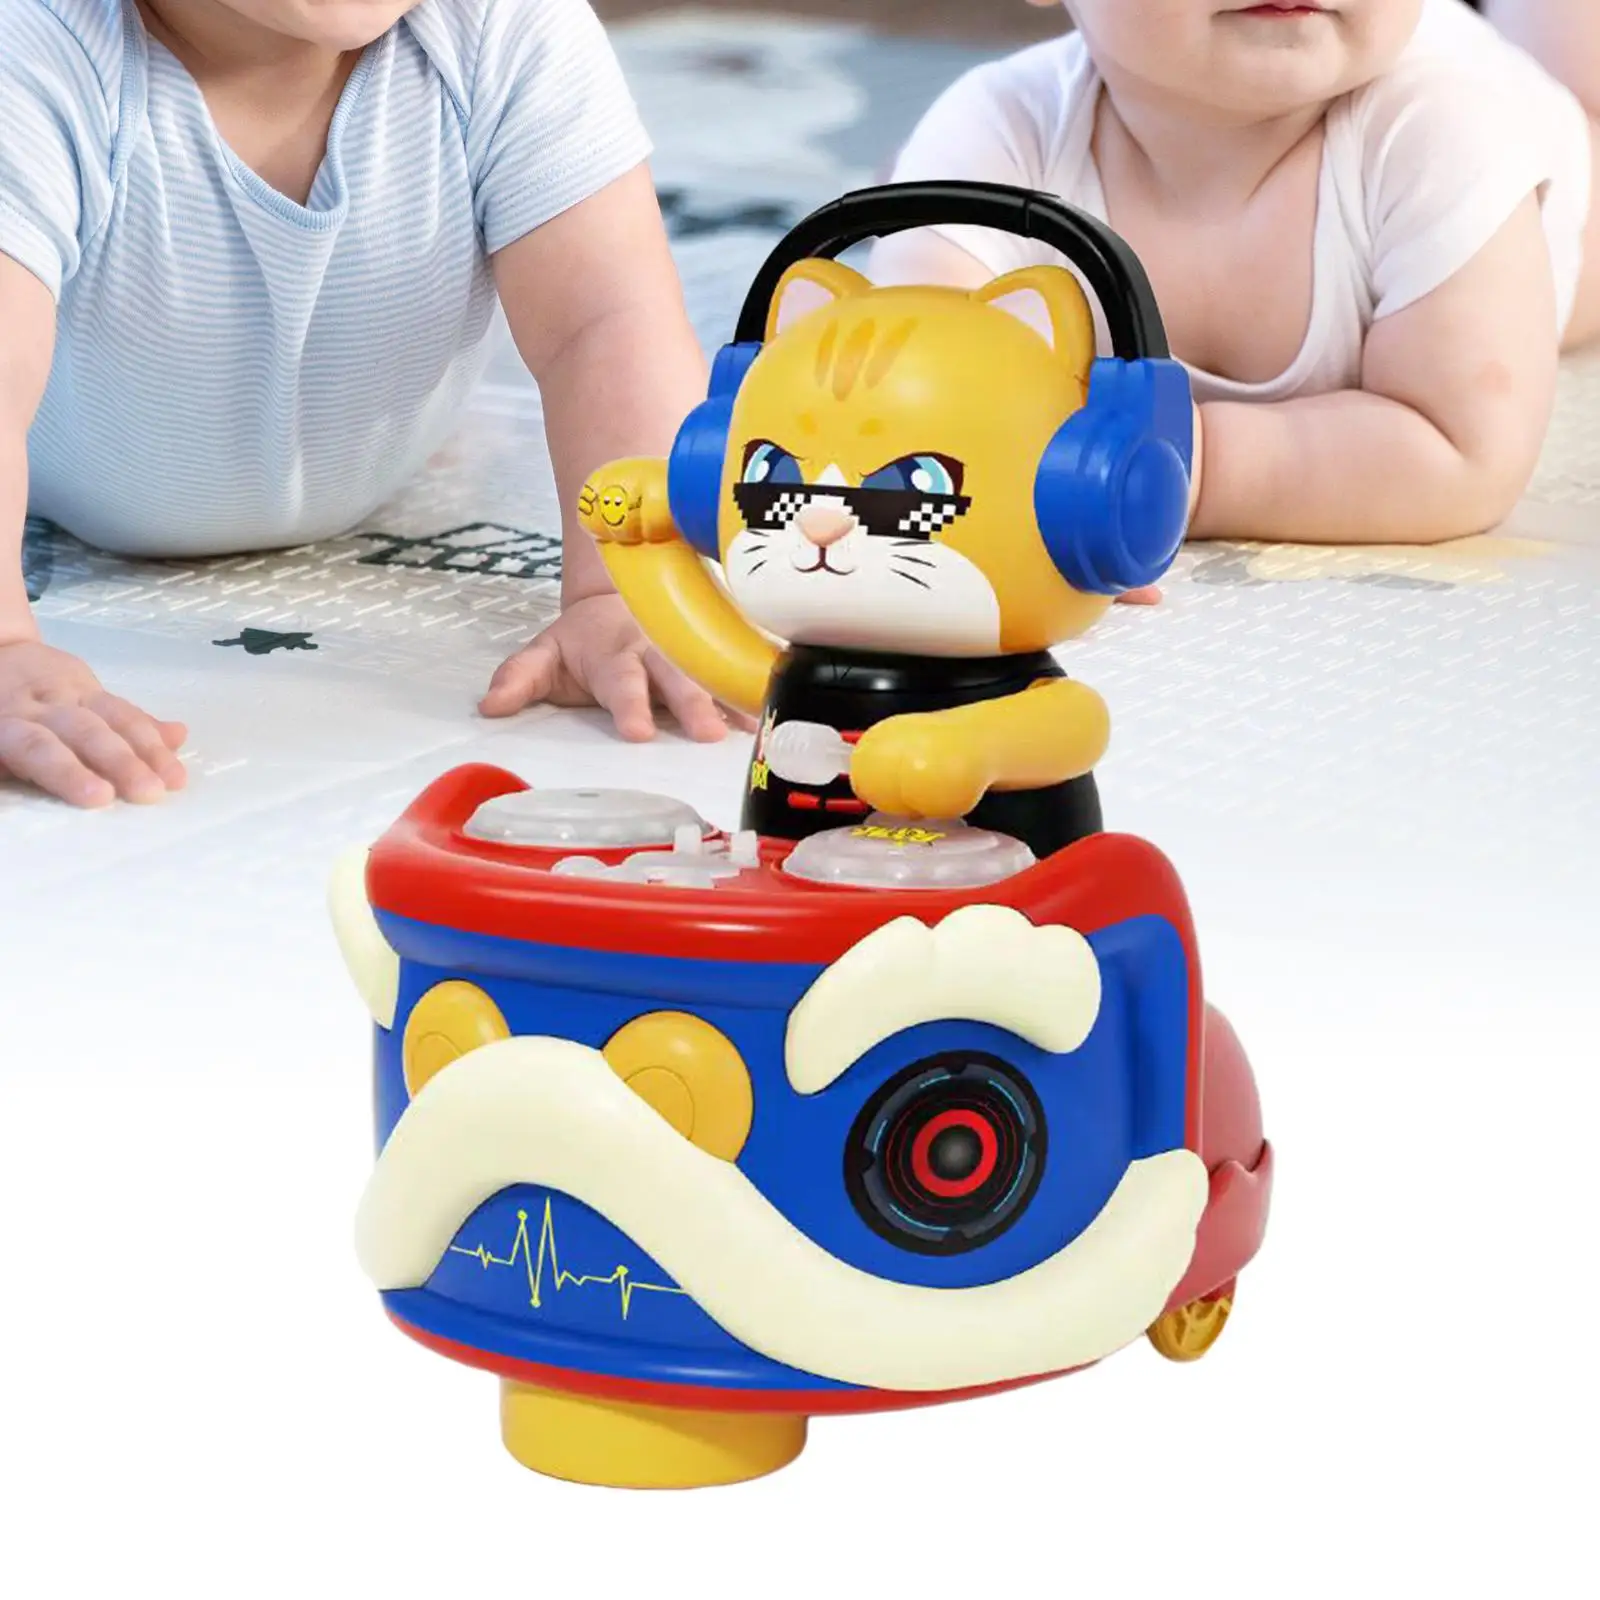 Baby Toy Walking Toy 360° Universal Wheel Dancing Cat Sensory for Holiday Gift Ages 1-3 Years Old Travel Toy Kids Preschool